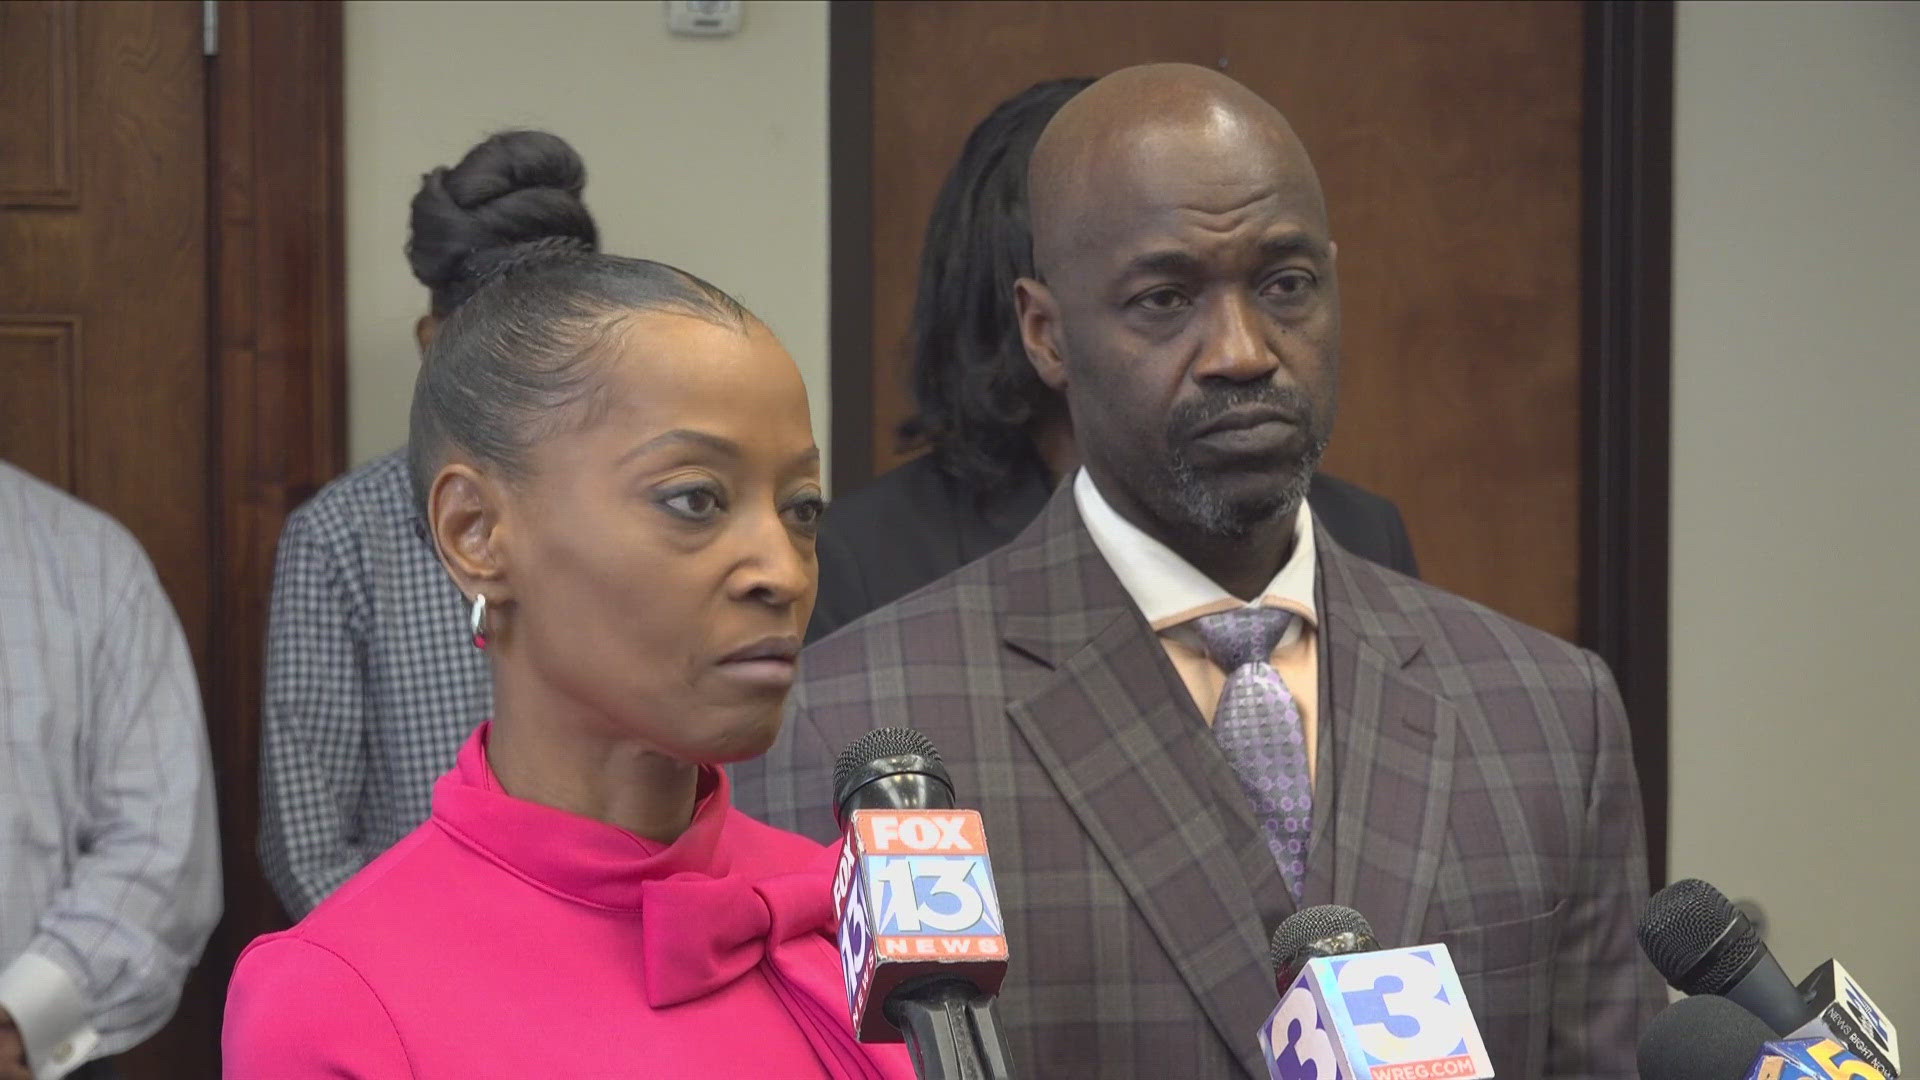 One day after Shelby County Clerk Wanda Halbert filed a motion to dismiss the petition to remove her from office, she spoke publicly regarding it.